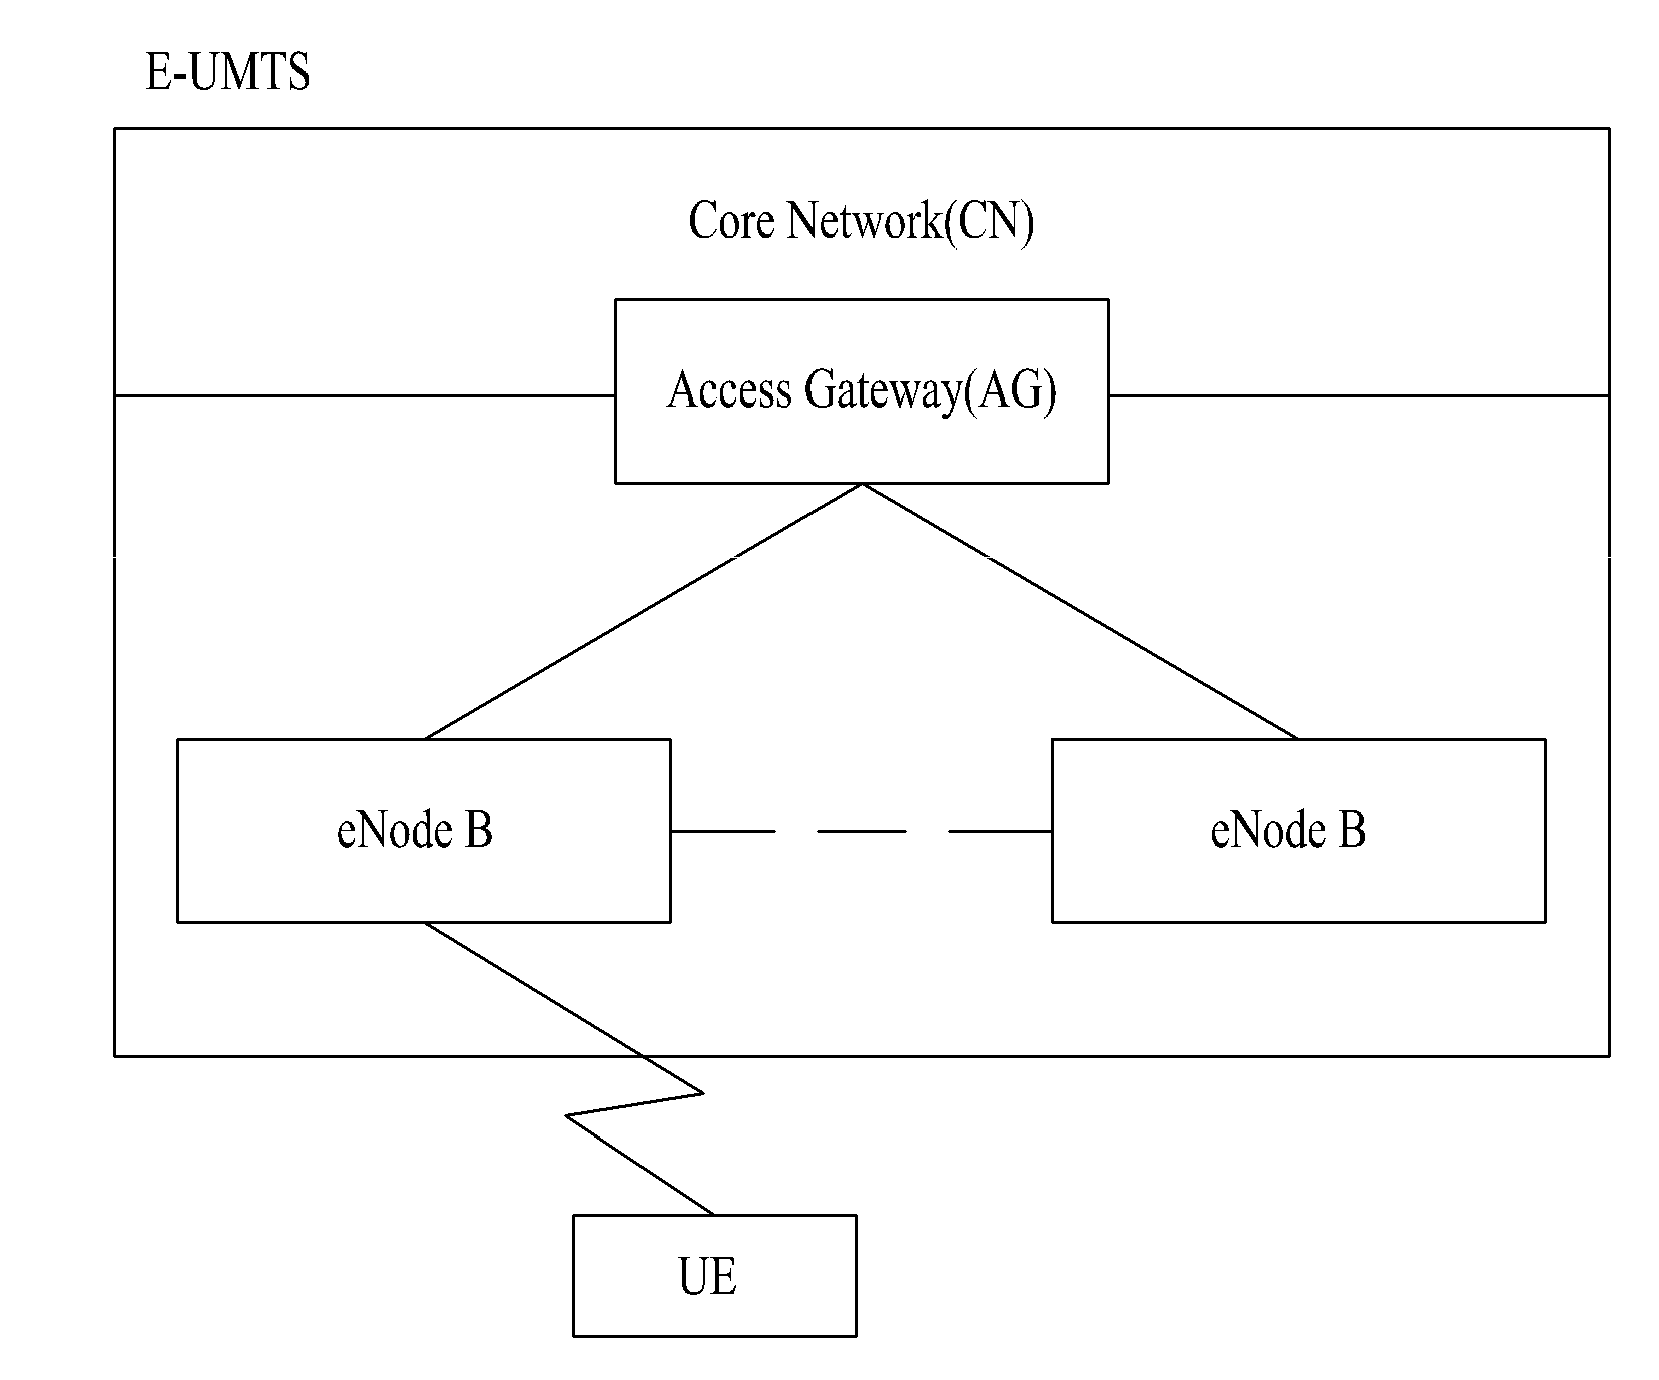 Apparatus and method for transceiving uplink transmission power control information in a multi-carrier communication system